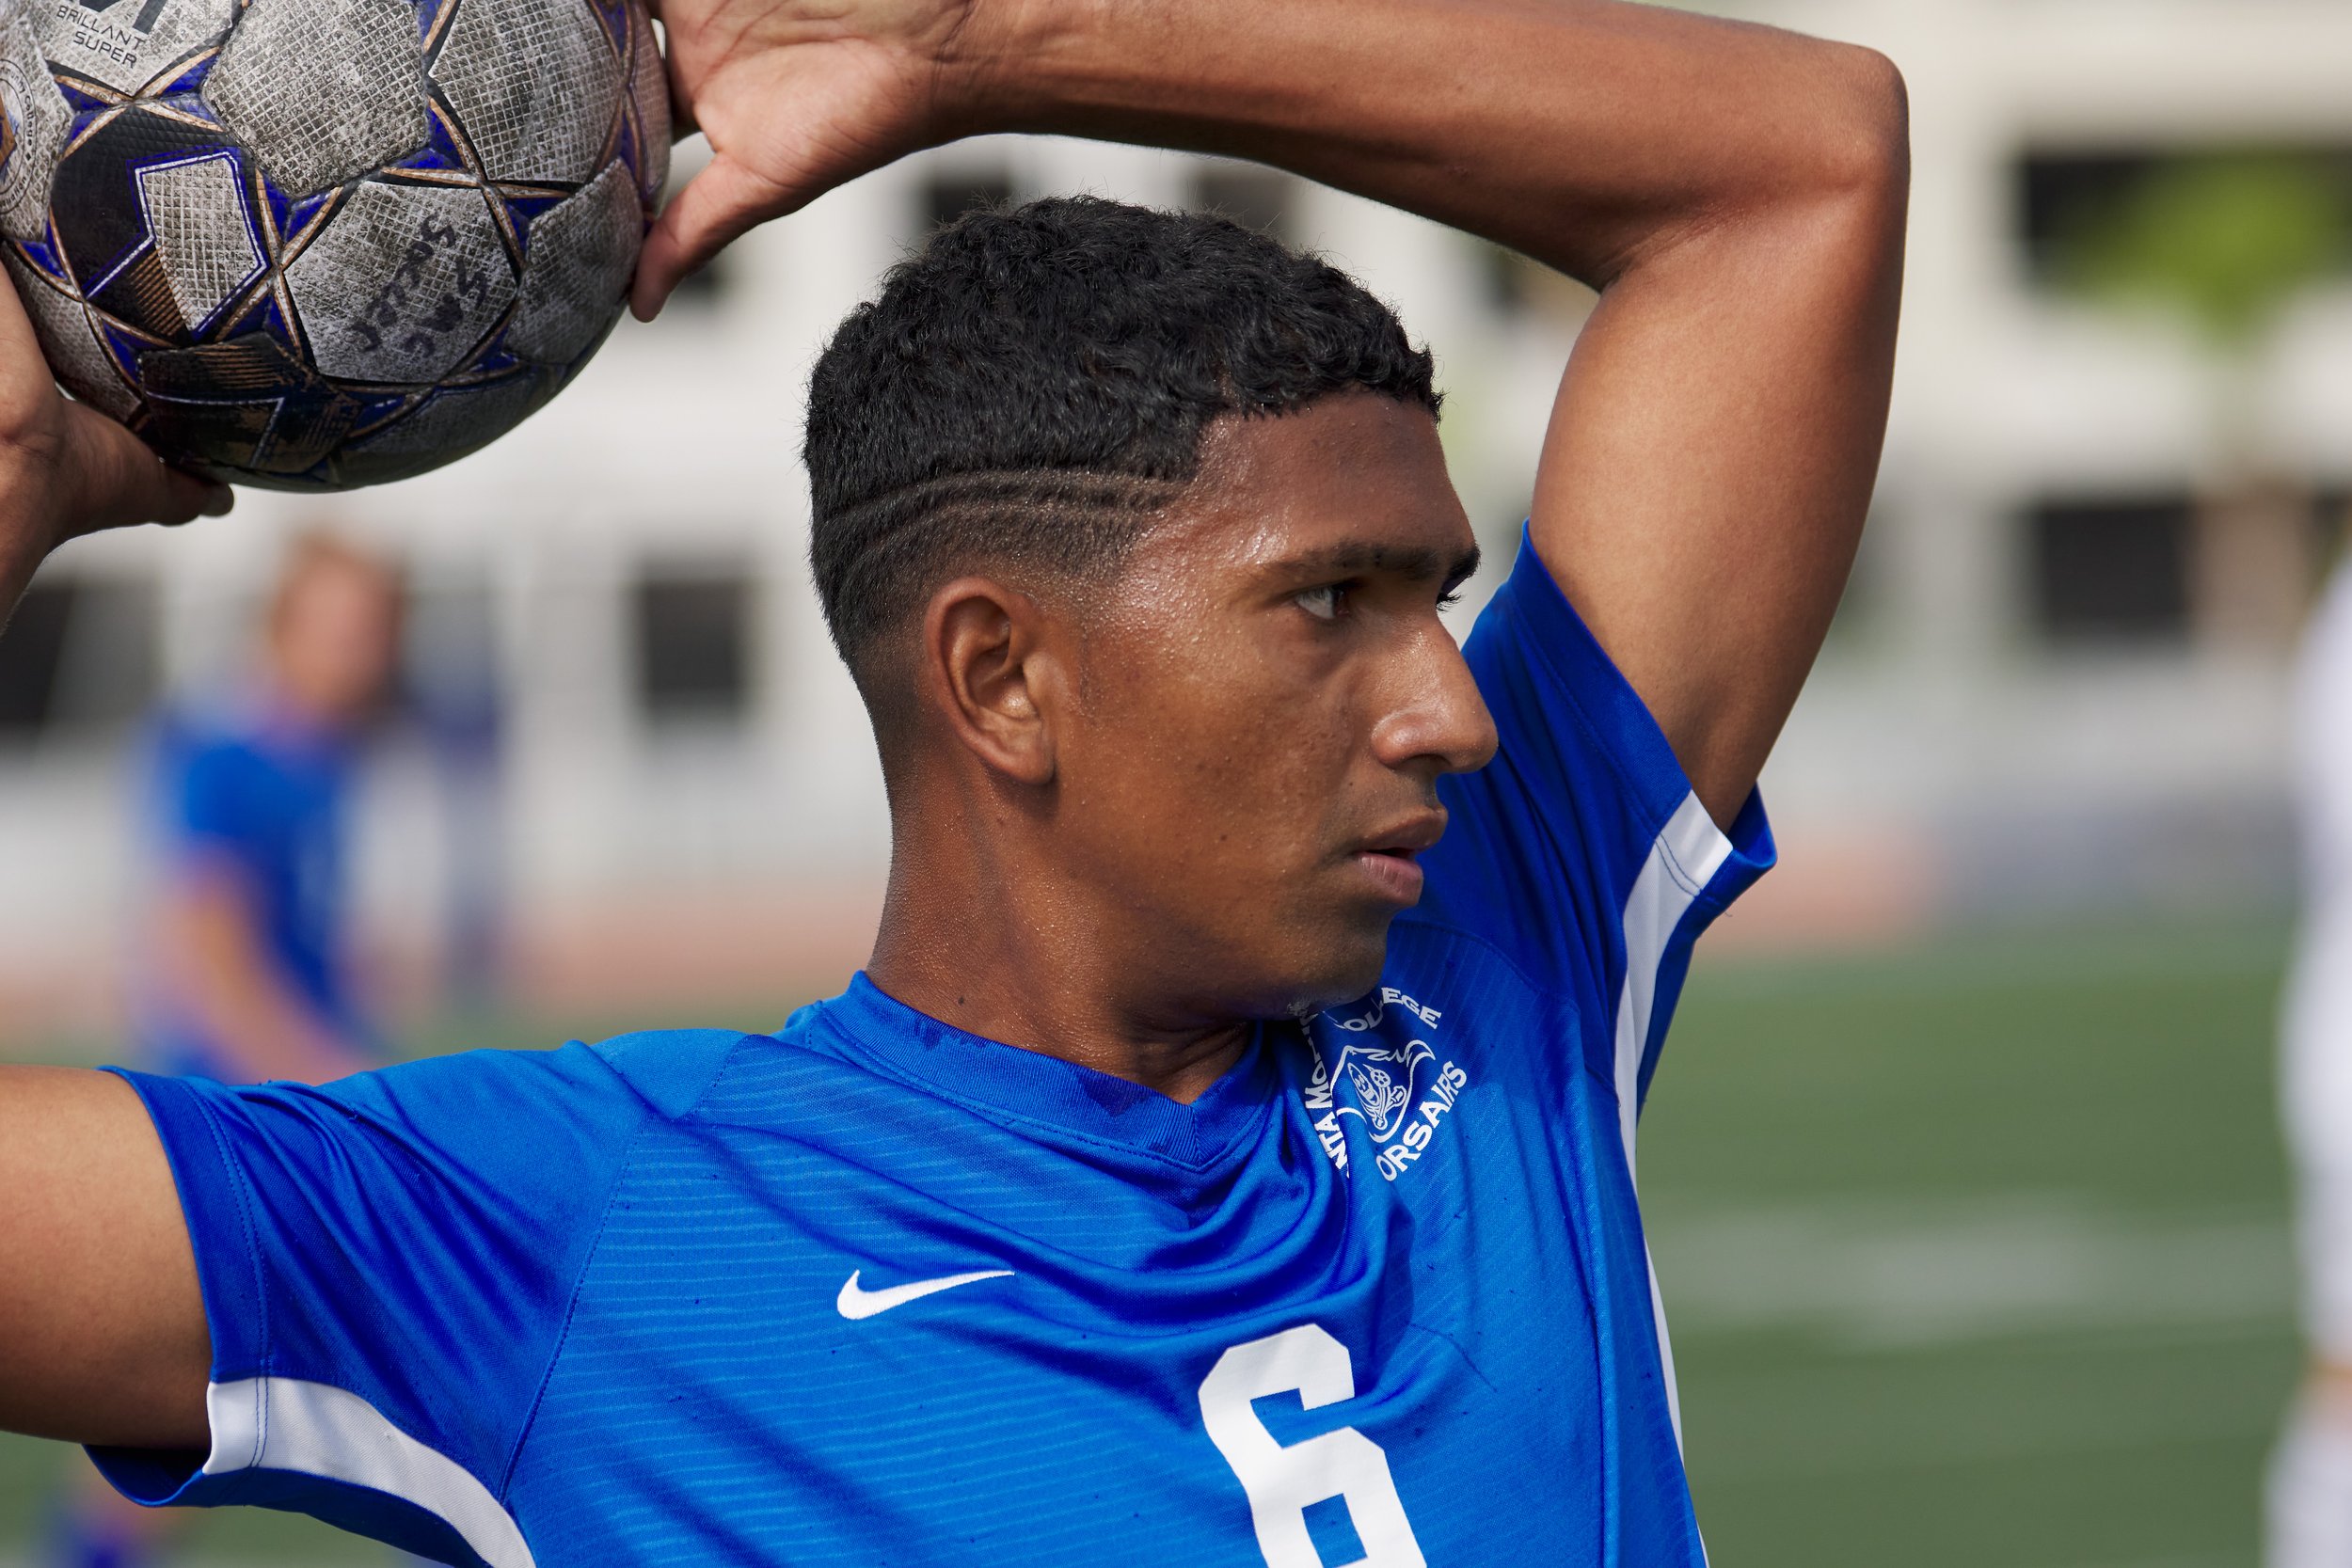  Santa Monica College Corsairs' Sebastian Alvarez Luna tosses the ball back into play during the men's soccer match against the Los Angeles Mission College Eagles on Tuesday, Nov. 1, 2022, at Corsair Field in Santa Monica, Calif. The Corsairs won 3-0